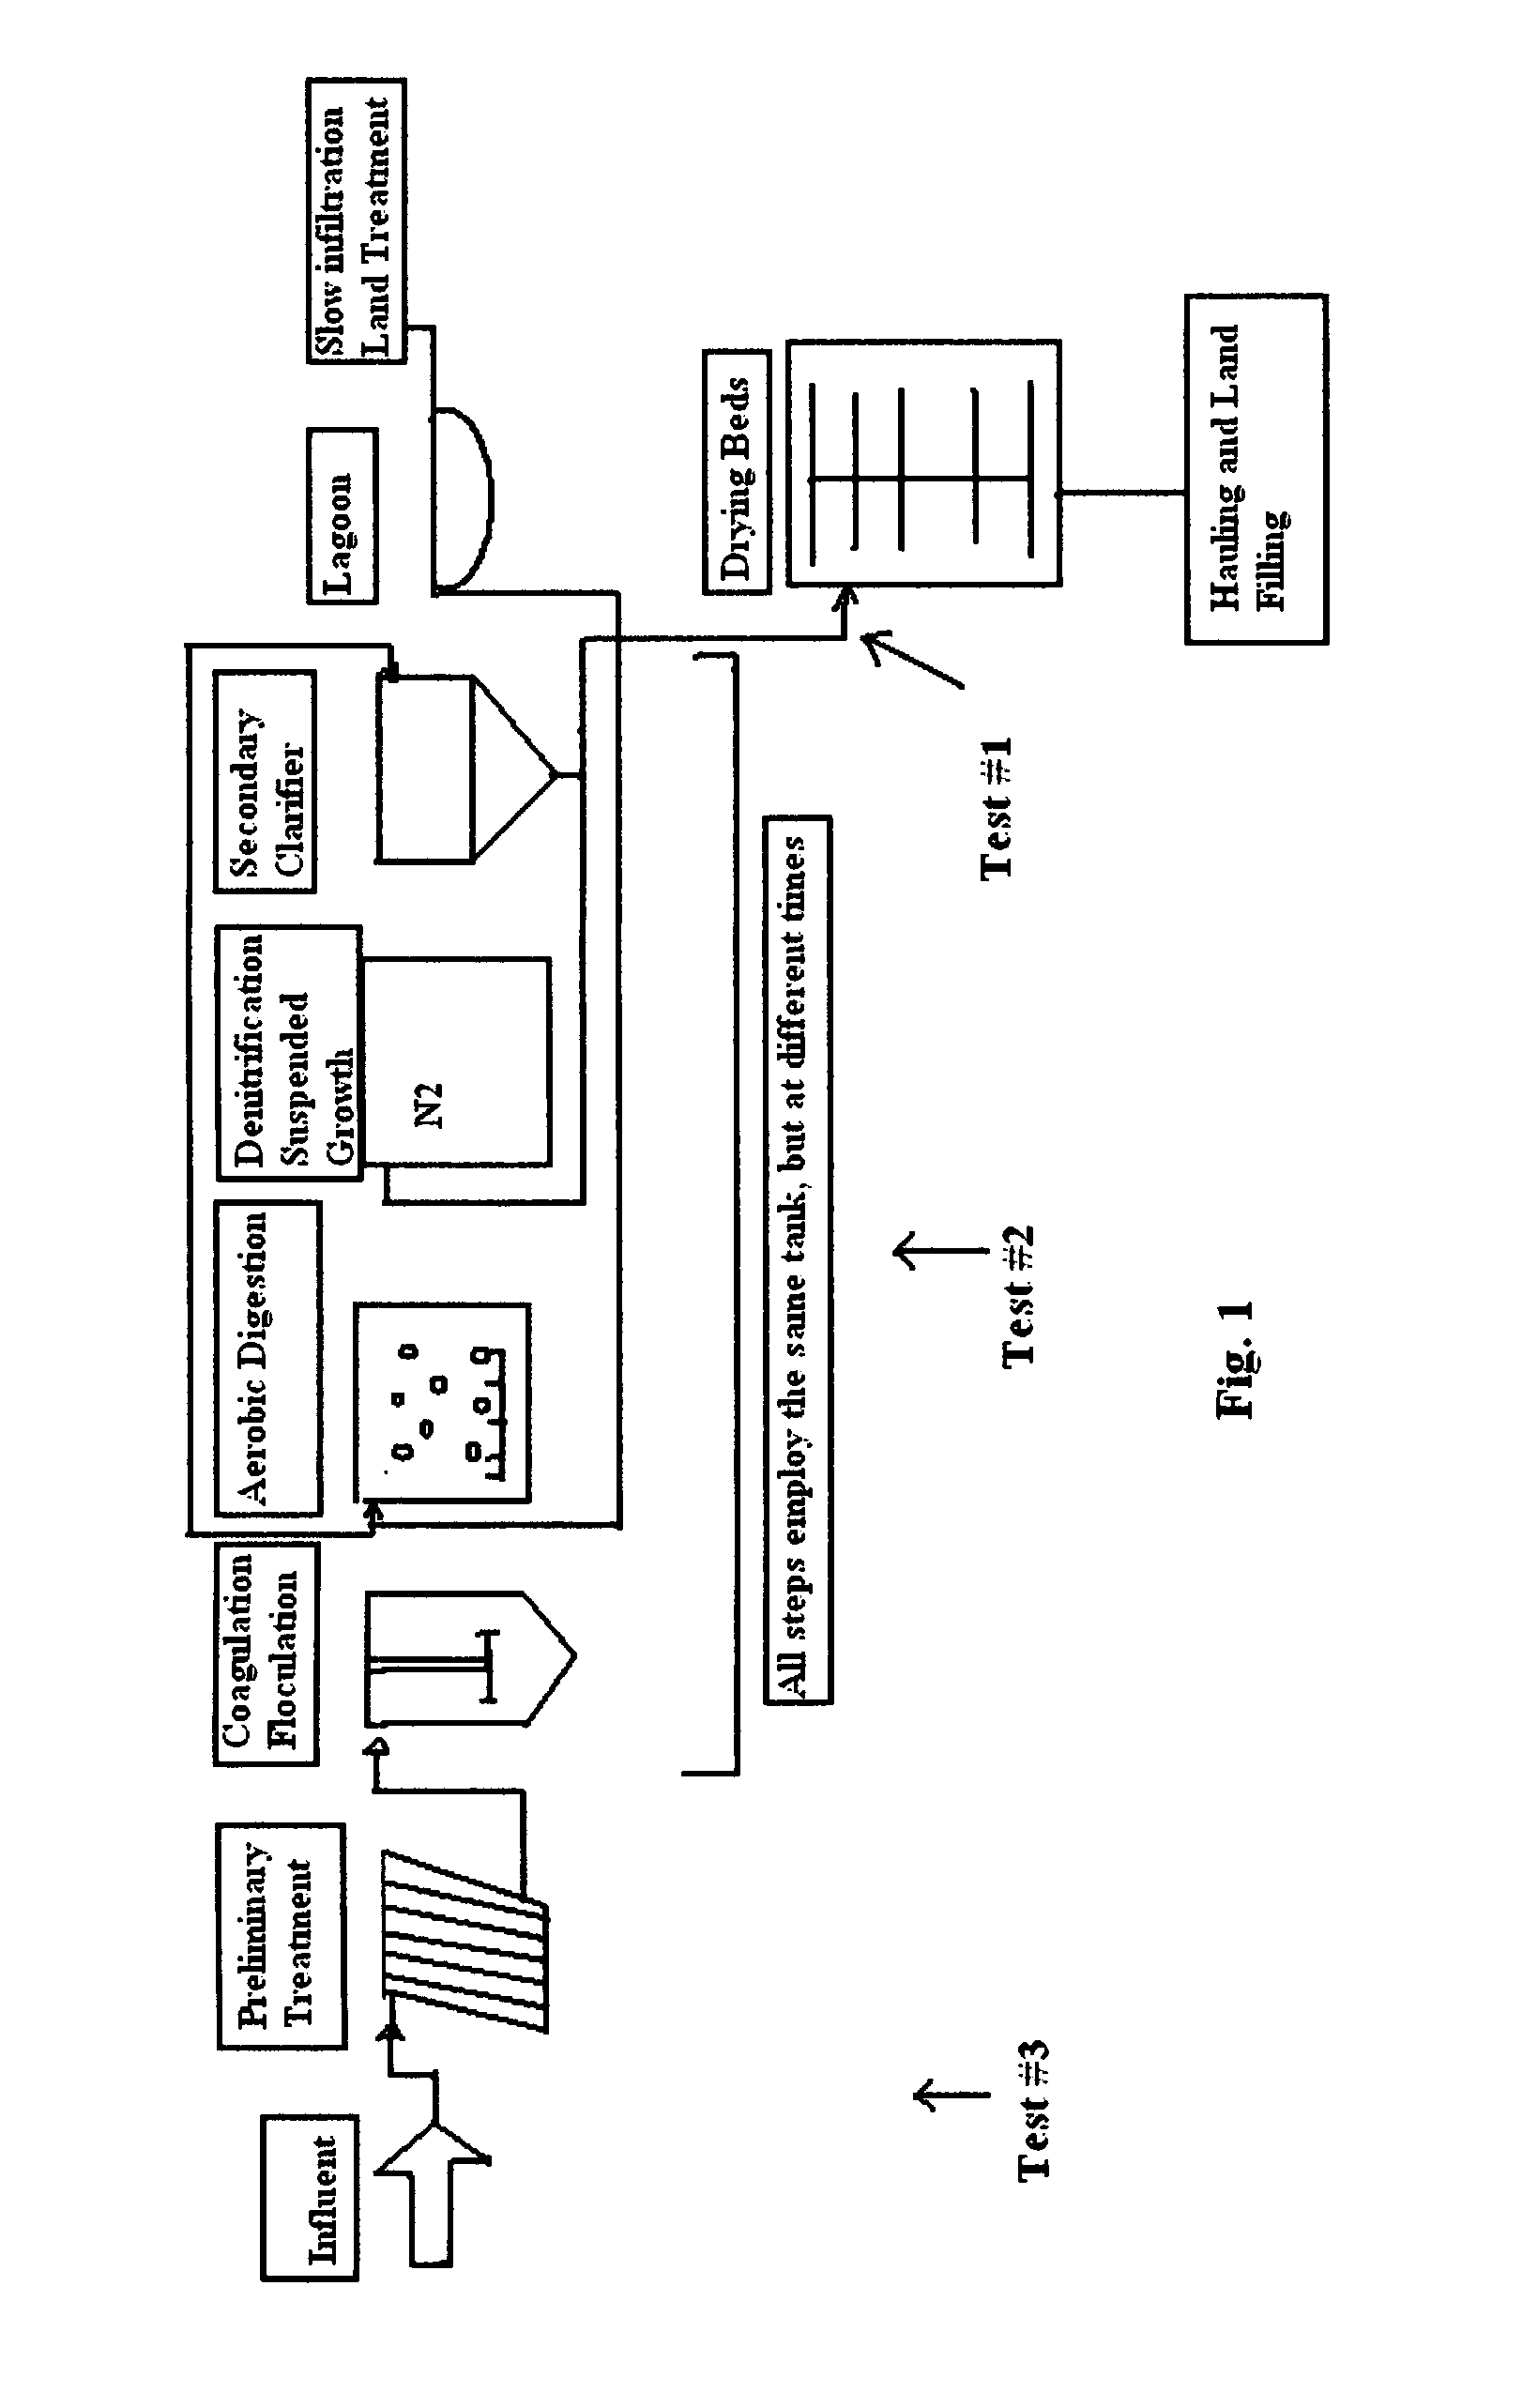 Wastewater chemical/biological treatment plant recovery apparatus and method